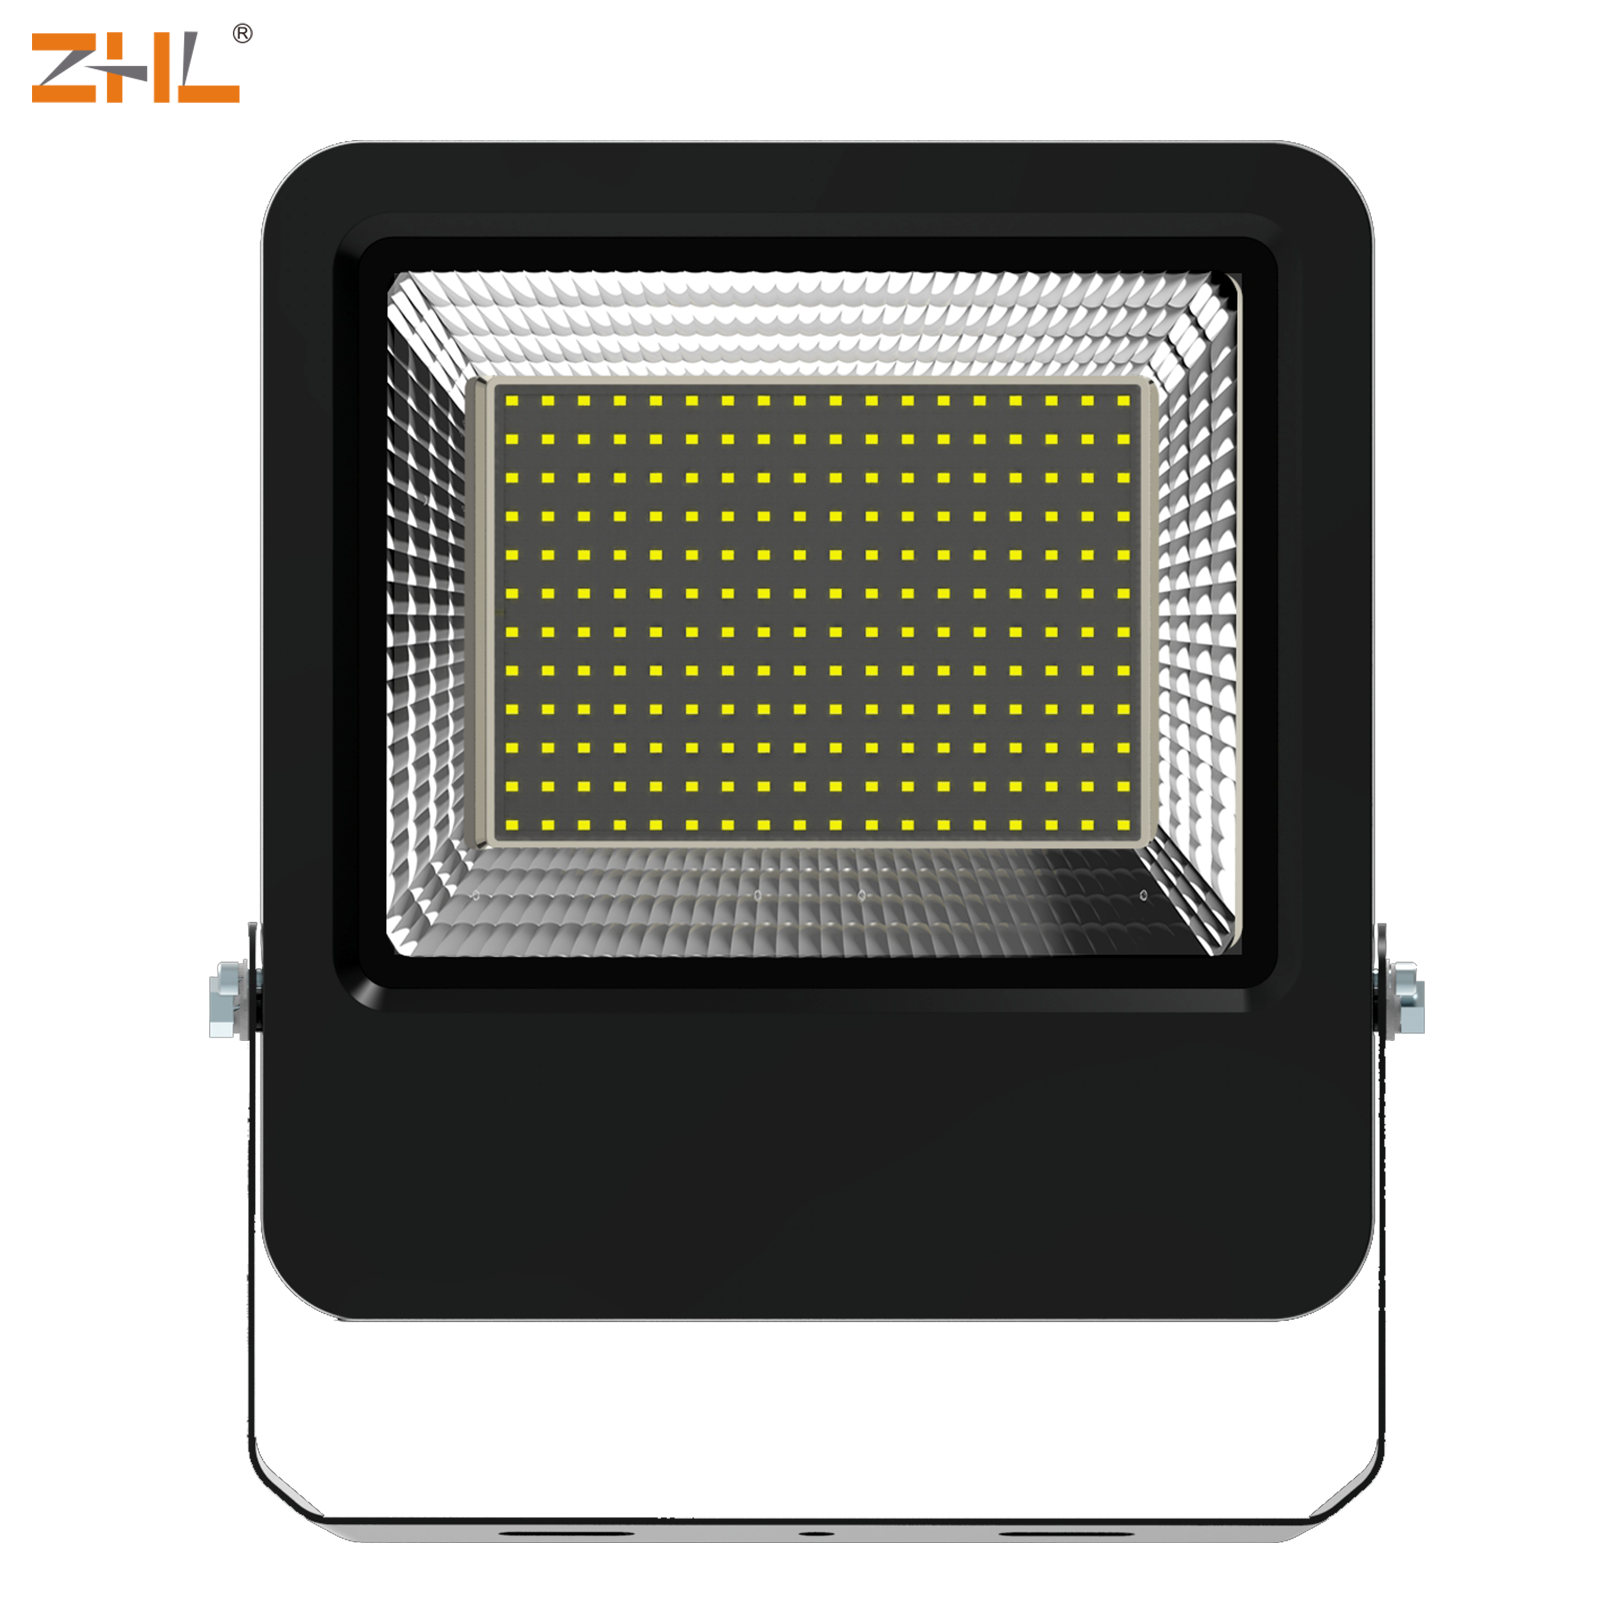 50W IP66 LED DRIVER - Buy LED Lights and LED Raw Material